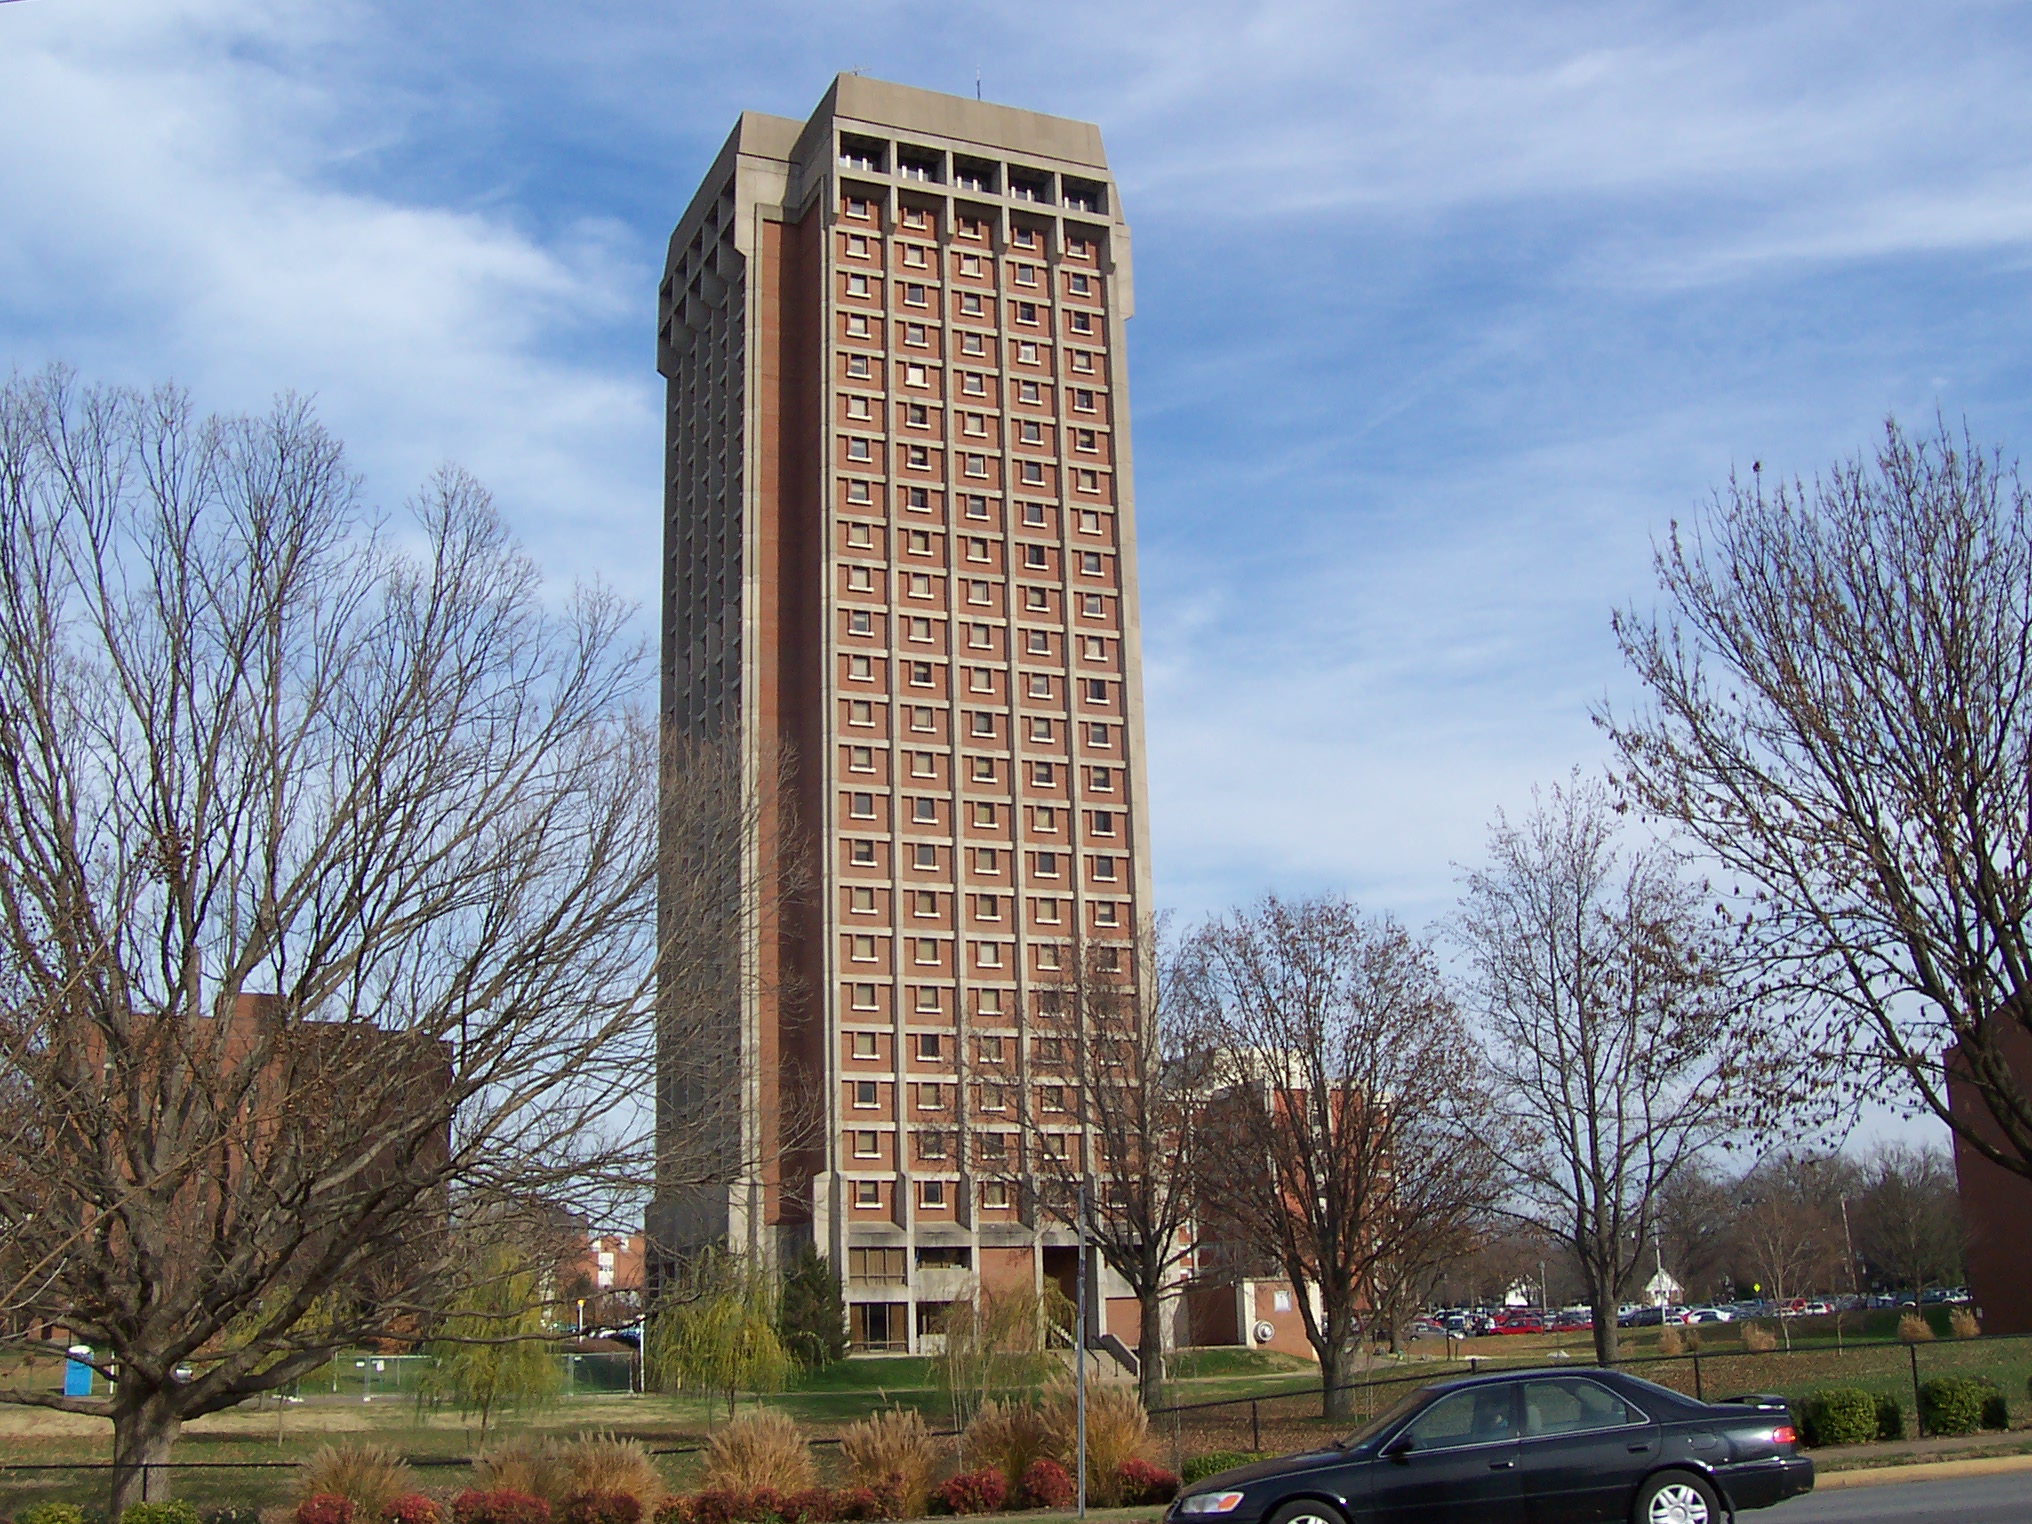 File:Pearce Ford Tower (Bowling Green, Kentucky).jpg - Wikimedia Commons